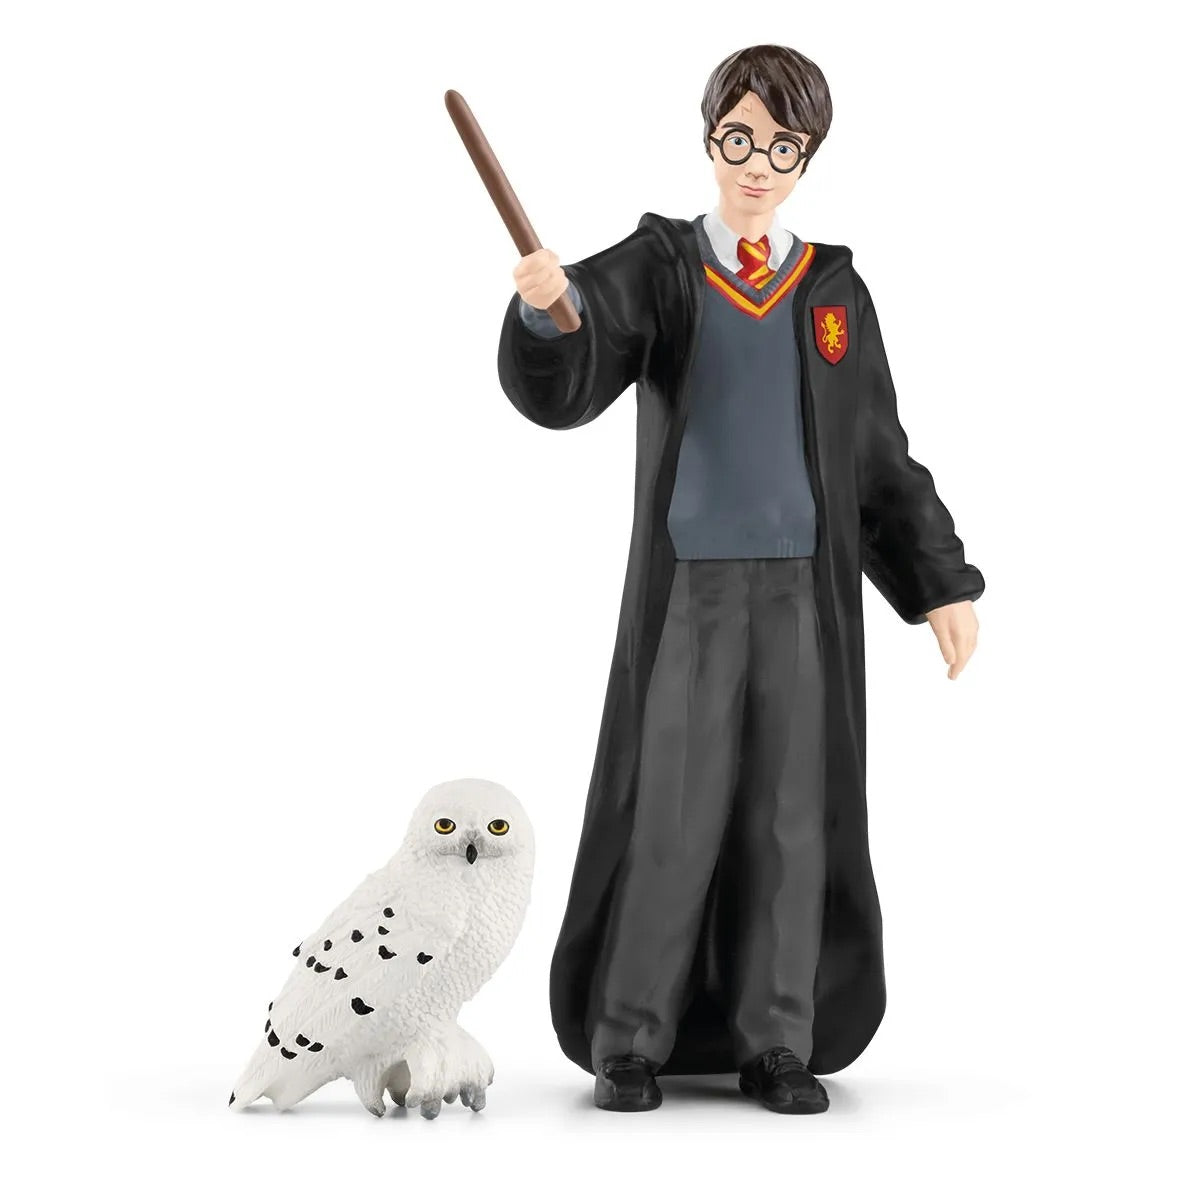 Harry Potter Harry & Hedwig Figurine by Schleich #42633